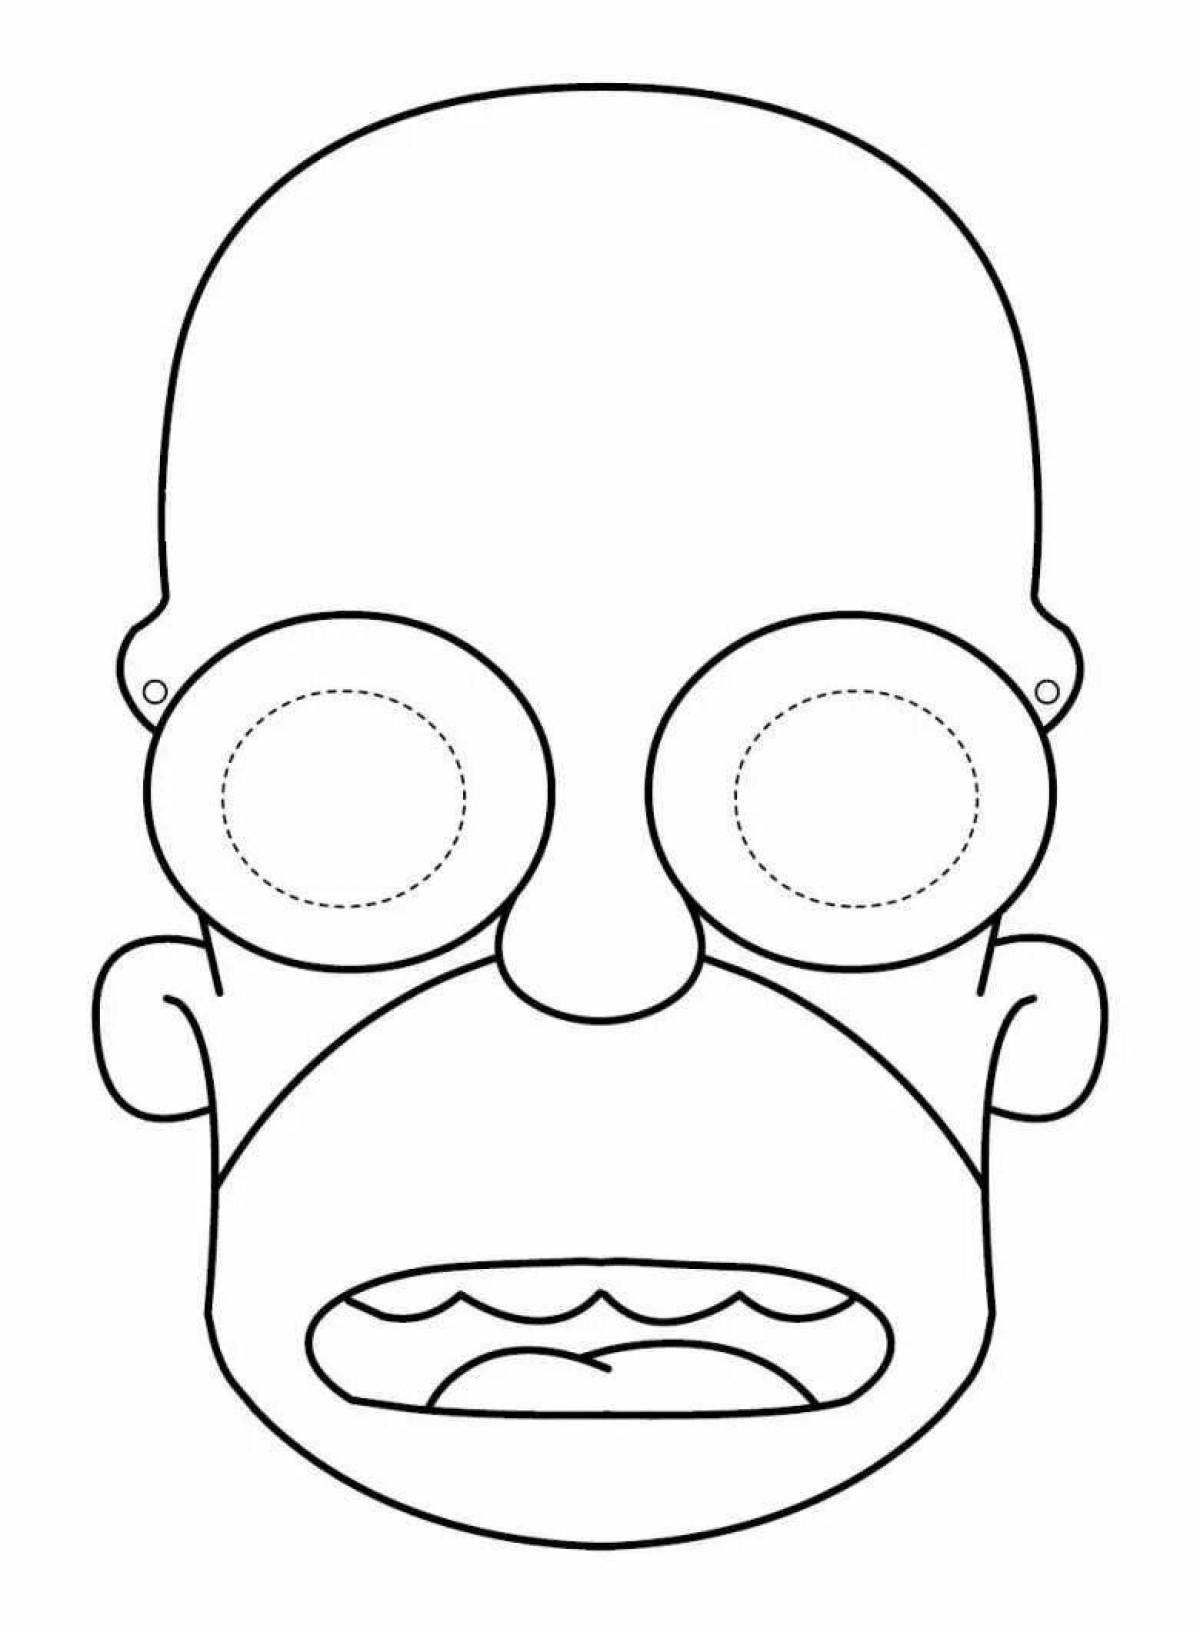 Coloring page adorable ice cream mask